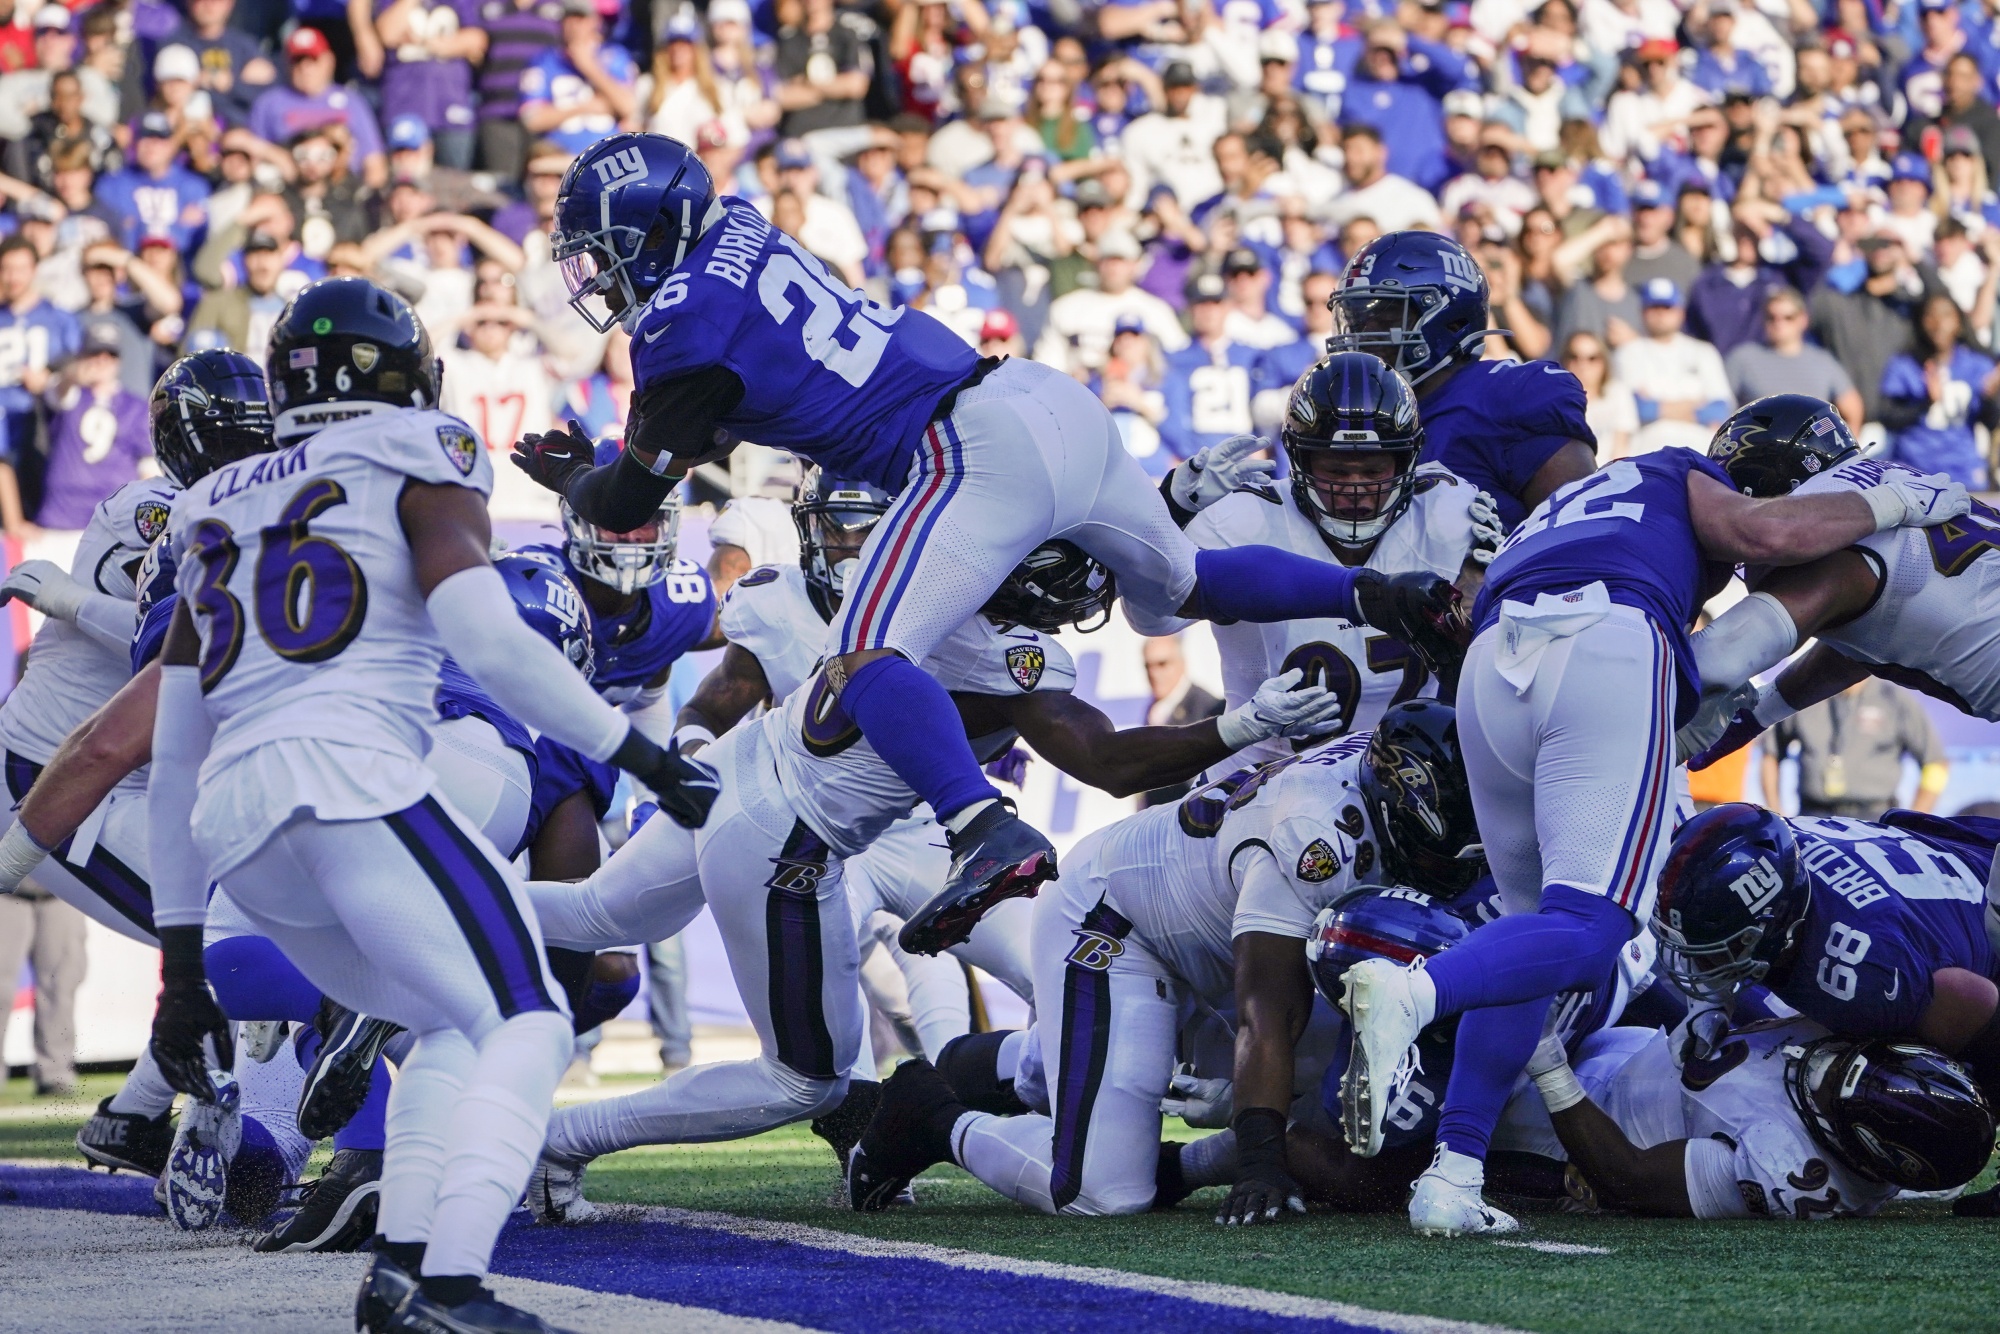 Giants Rally From 10 Down, Top Ravens 24-20 on Barkley's Run - Bloomberg